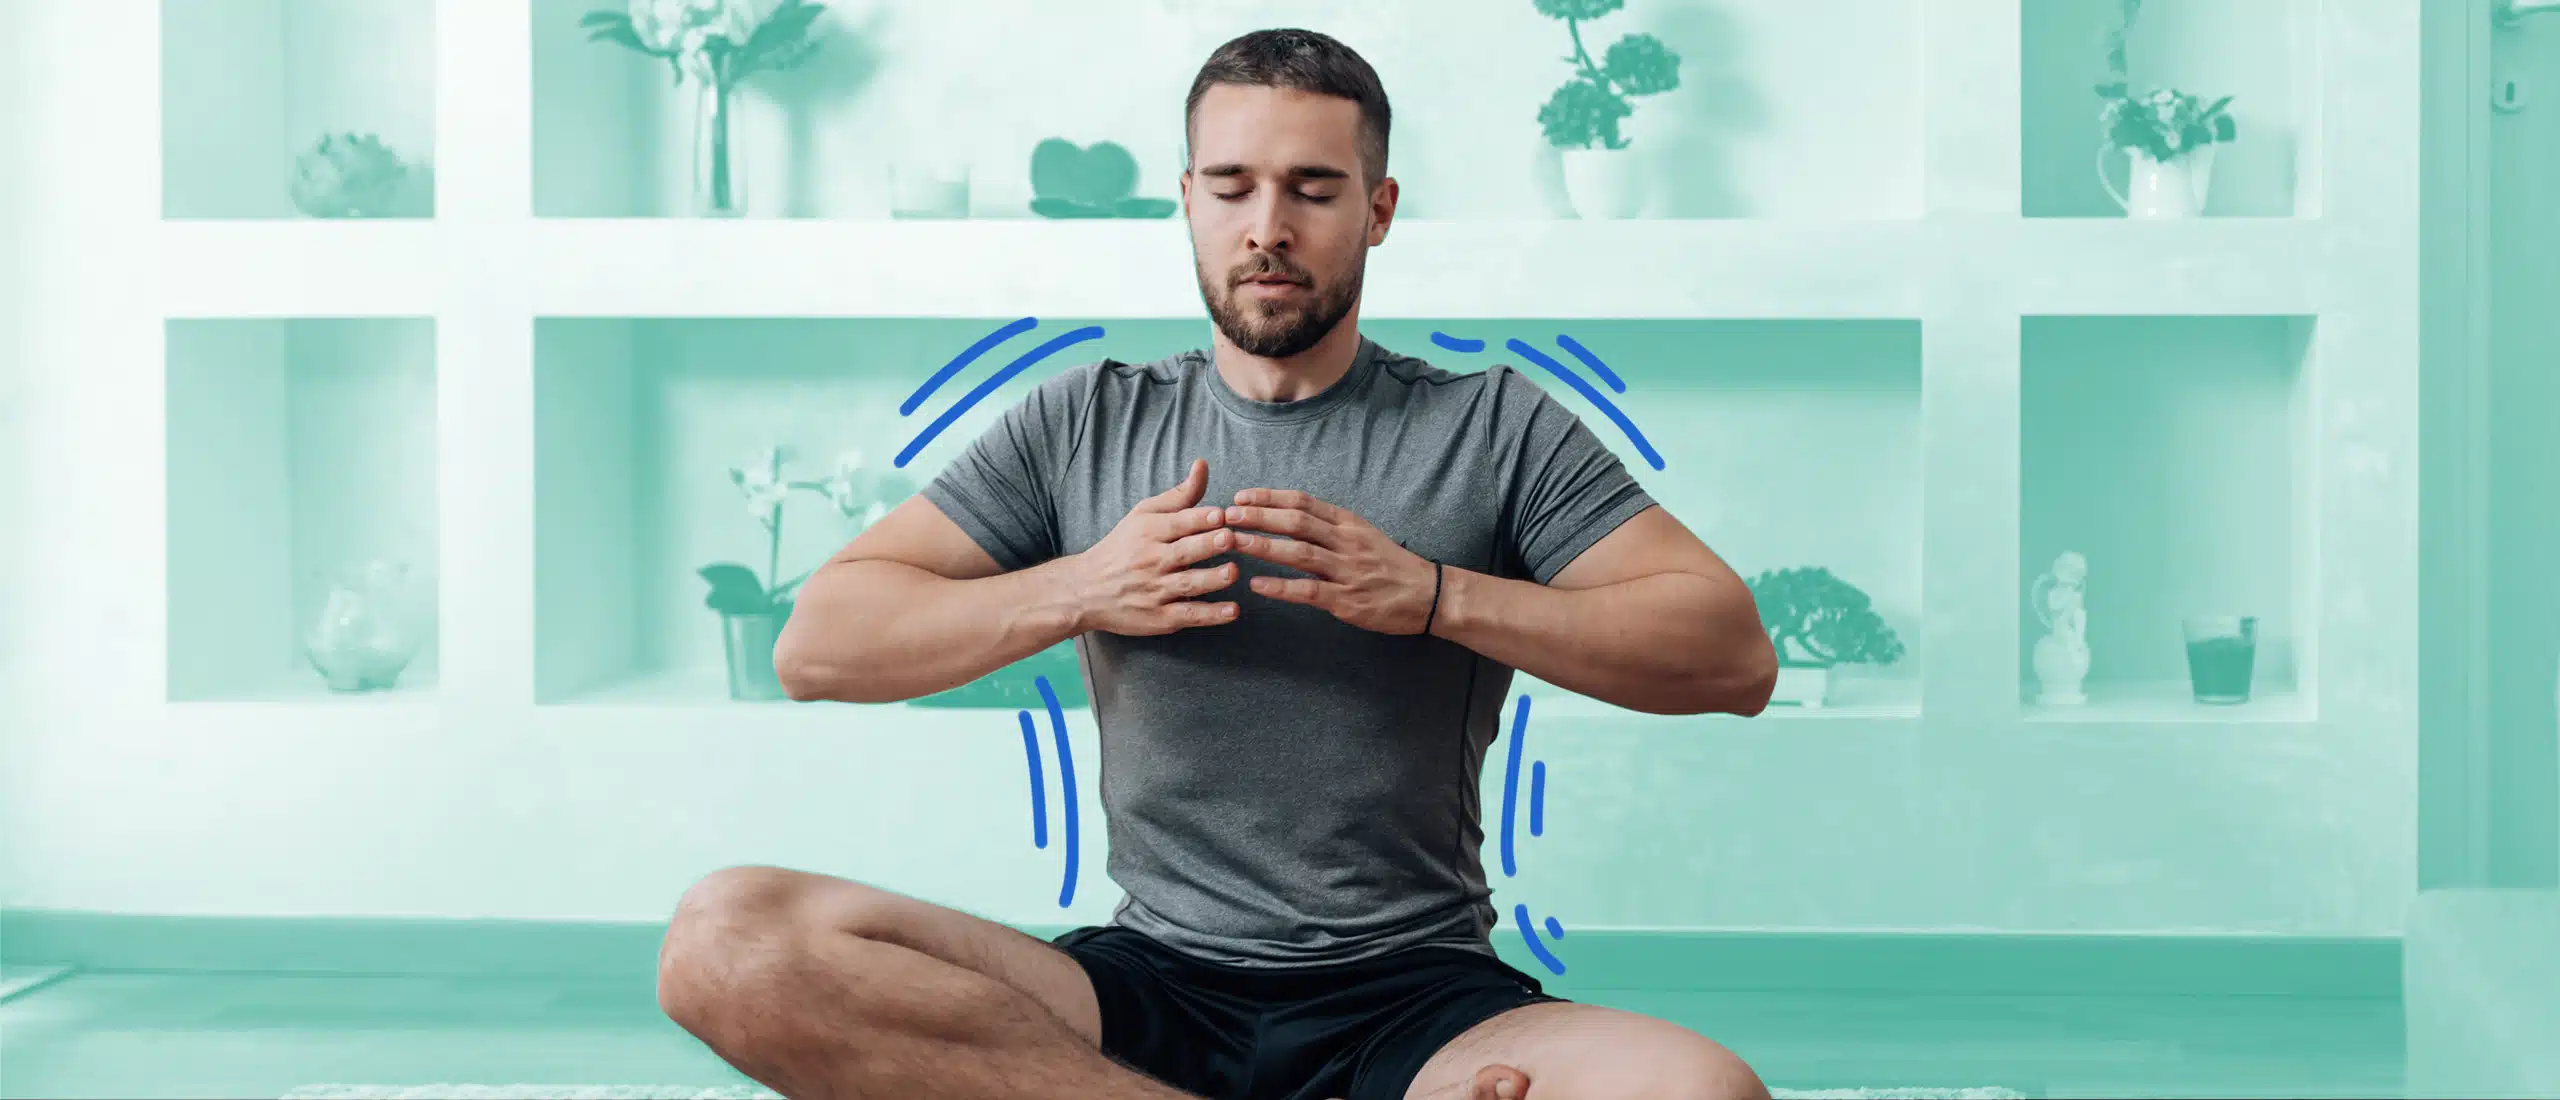 Man doing yoga pose and doing a deep breath with green background